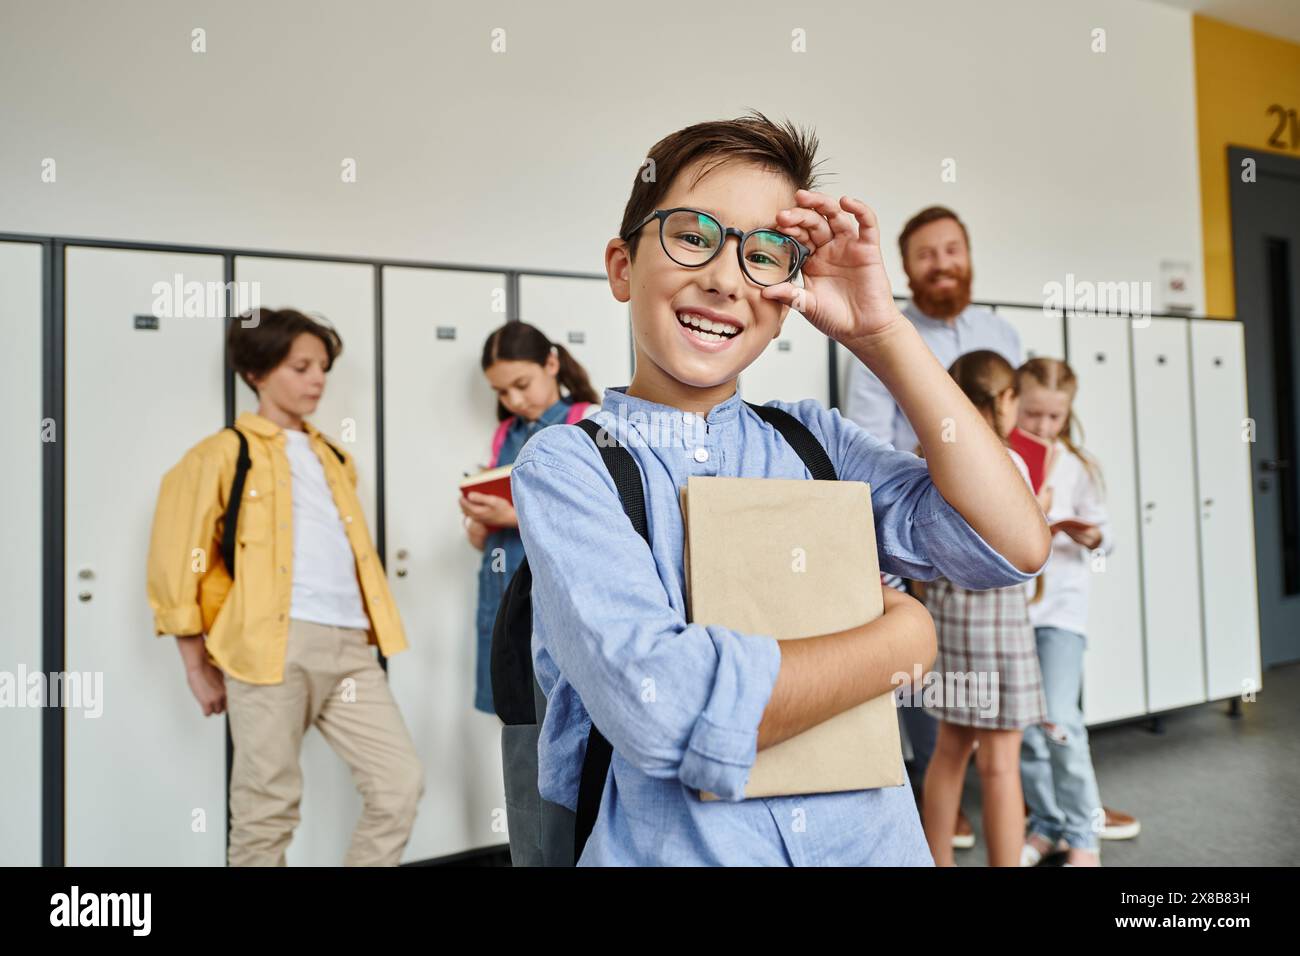 A boy in a blue shirt and glasses stands confidently in front of lockers in a school hallway. Stock Photo